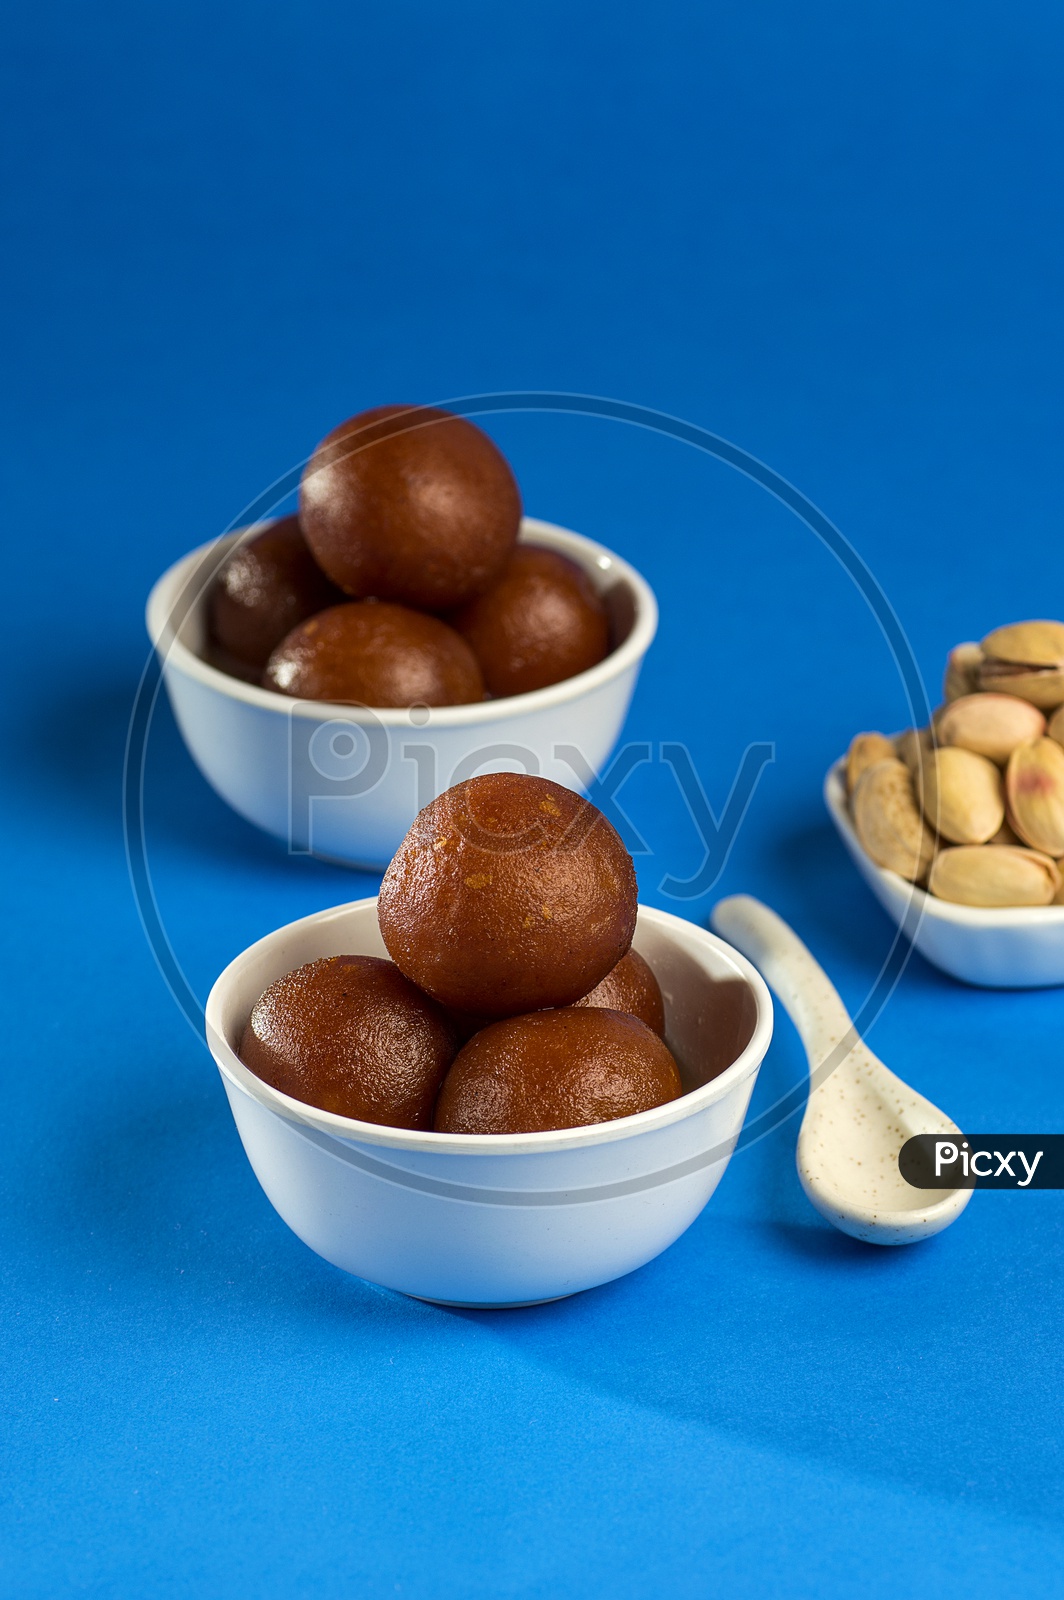 Image of Indian Dessert or Sweet Dish Gulab Jamun in a Bowl with Almond ...